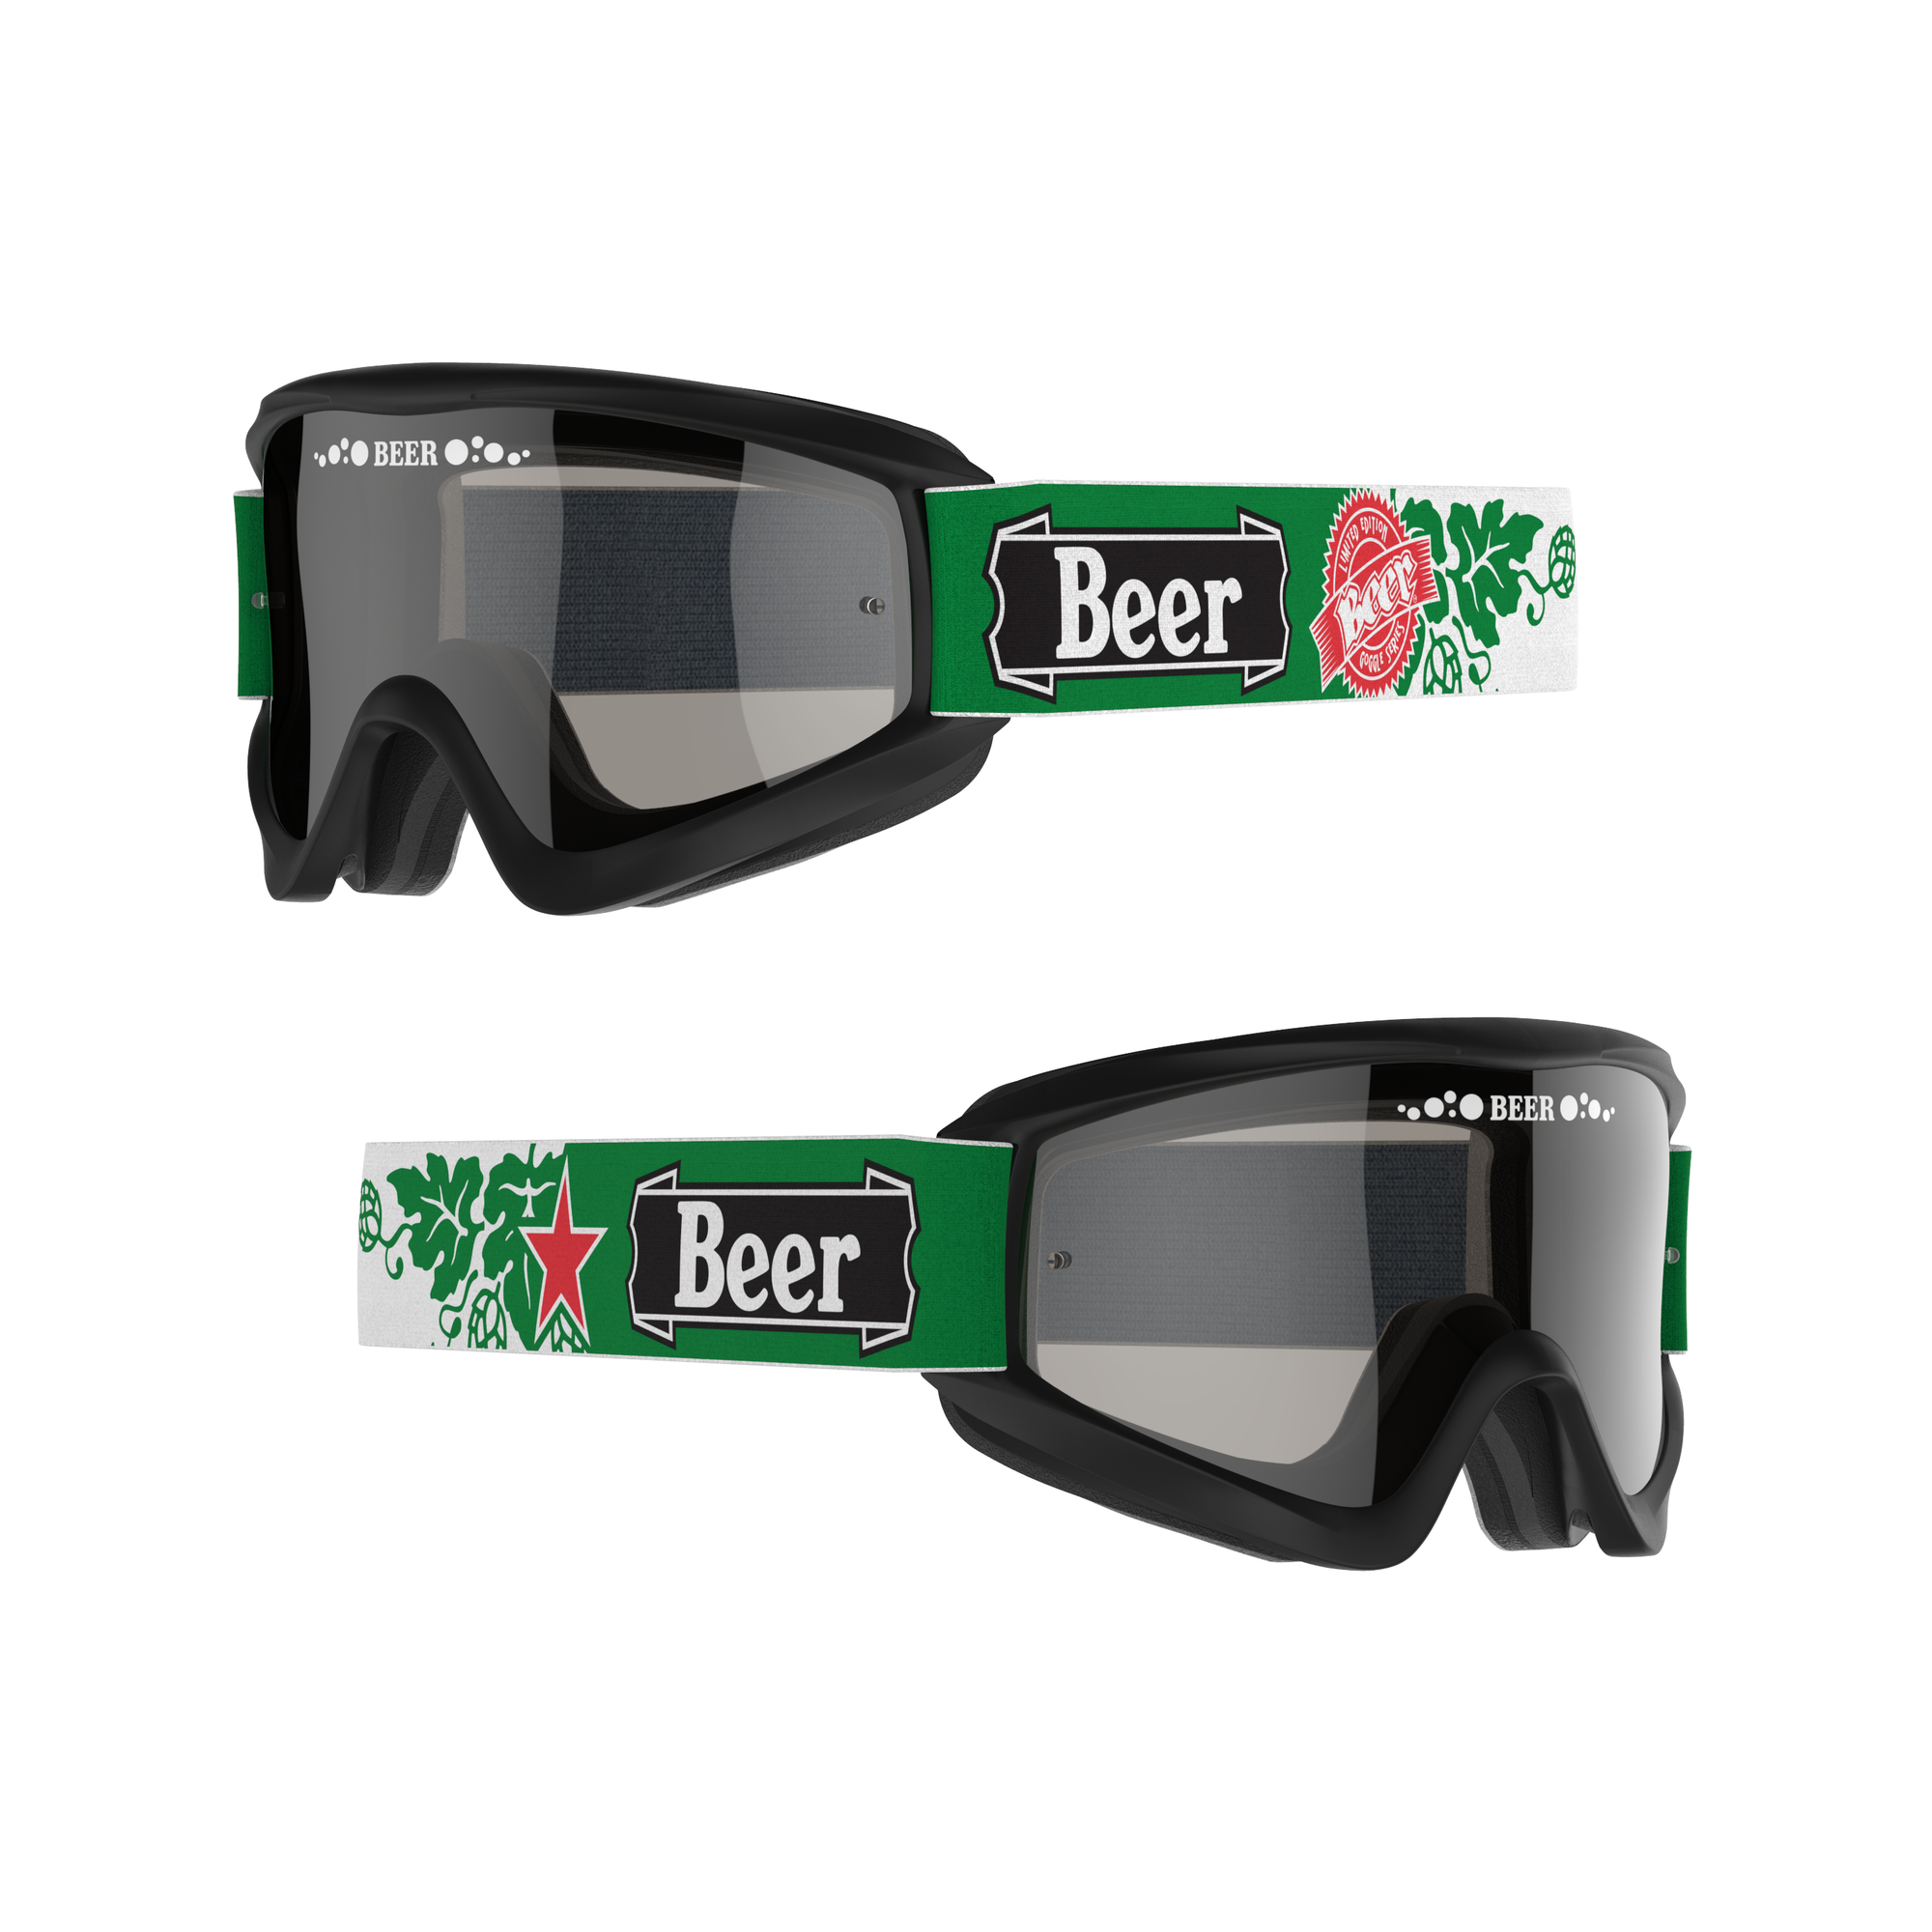 Beer Goggles Dry BEER Limited Edition "Heiny"